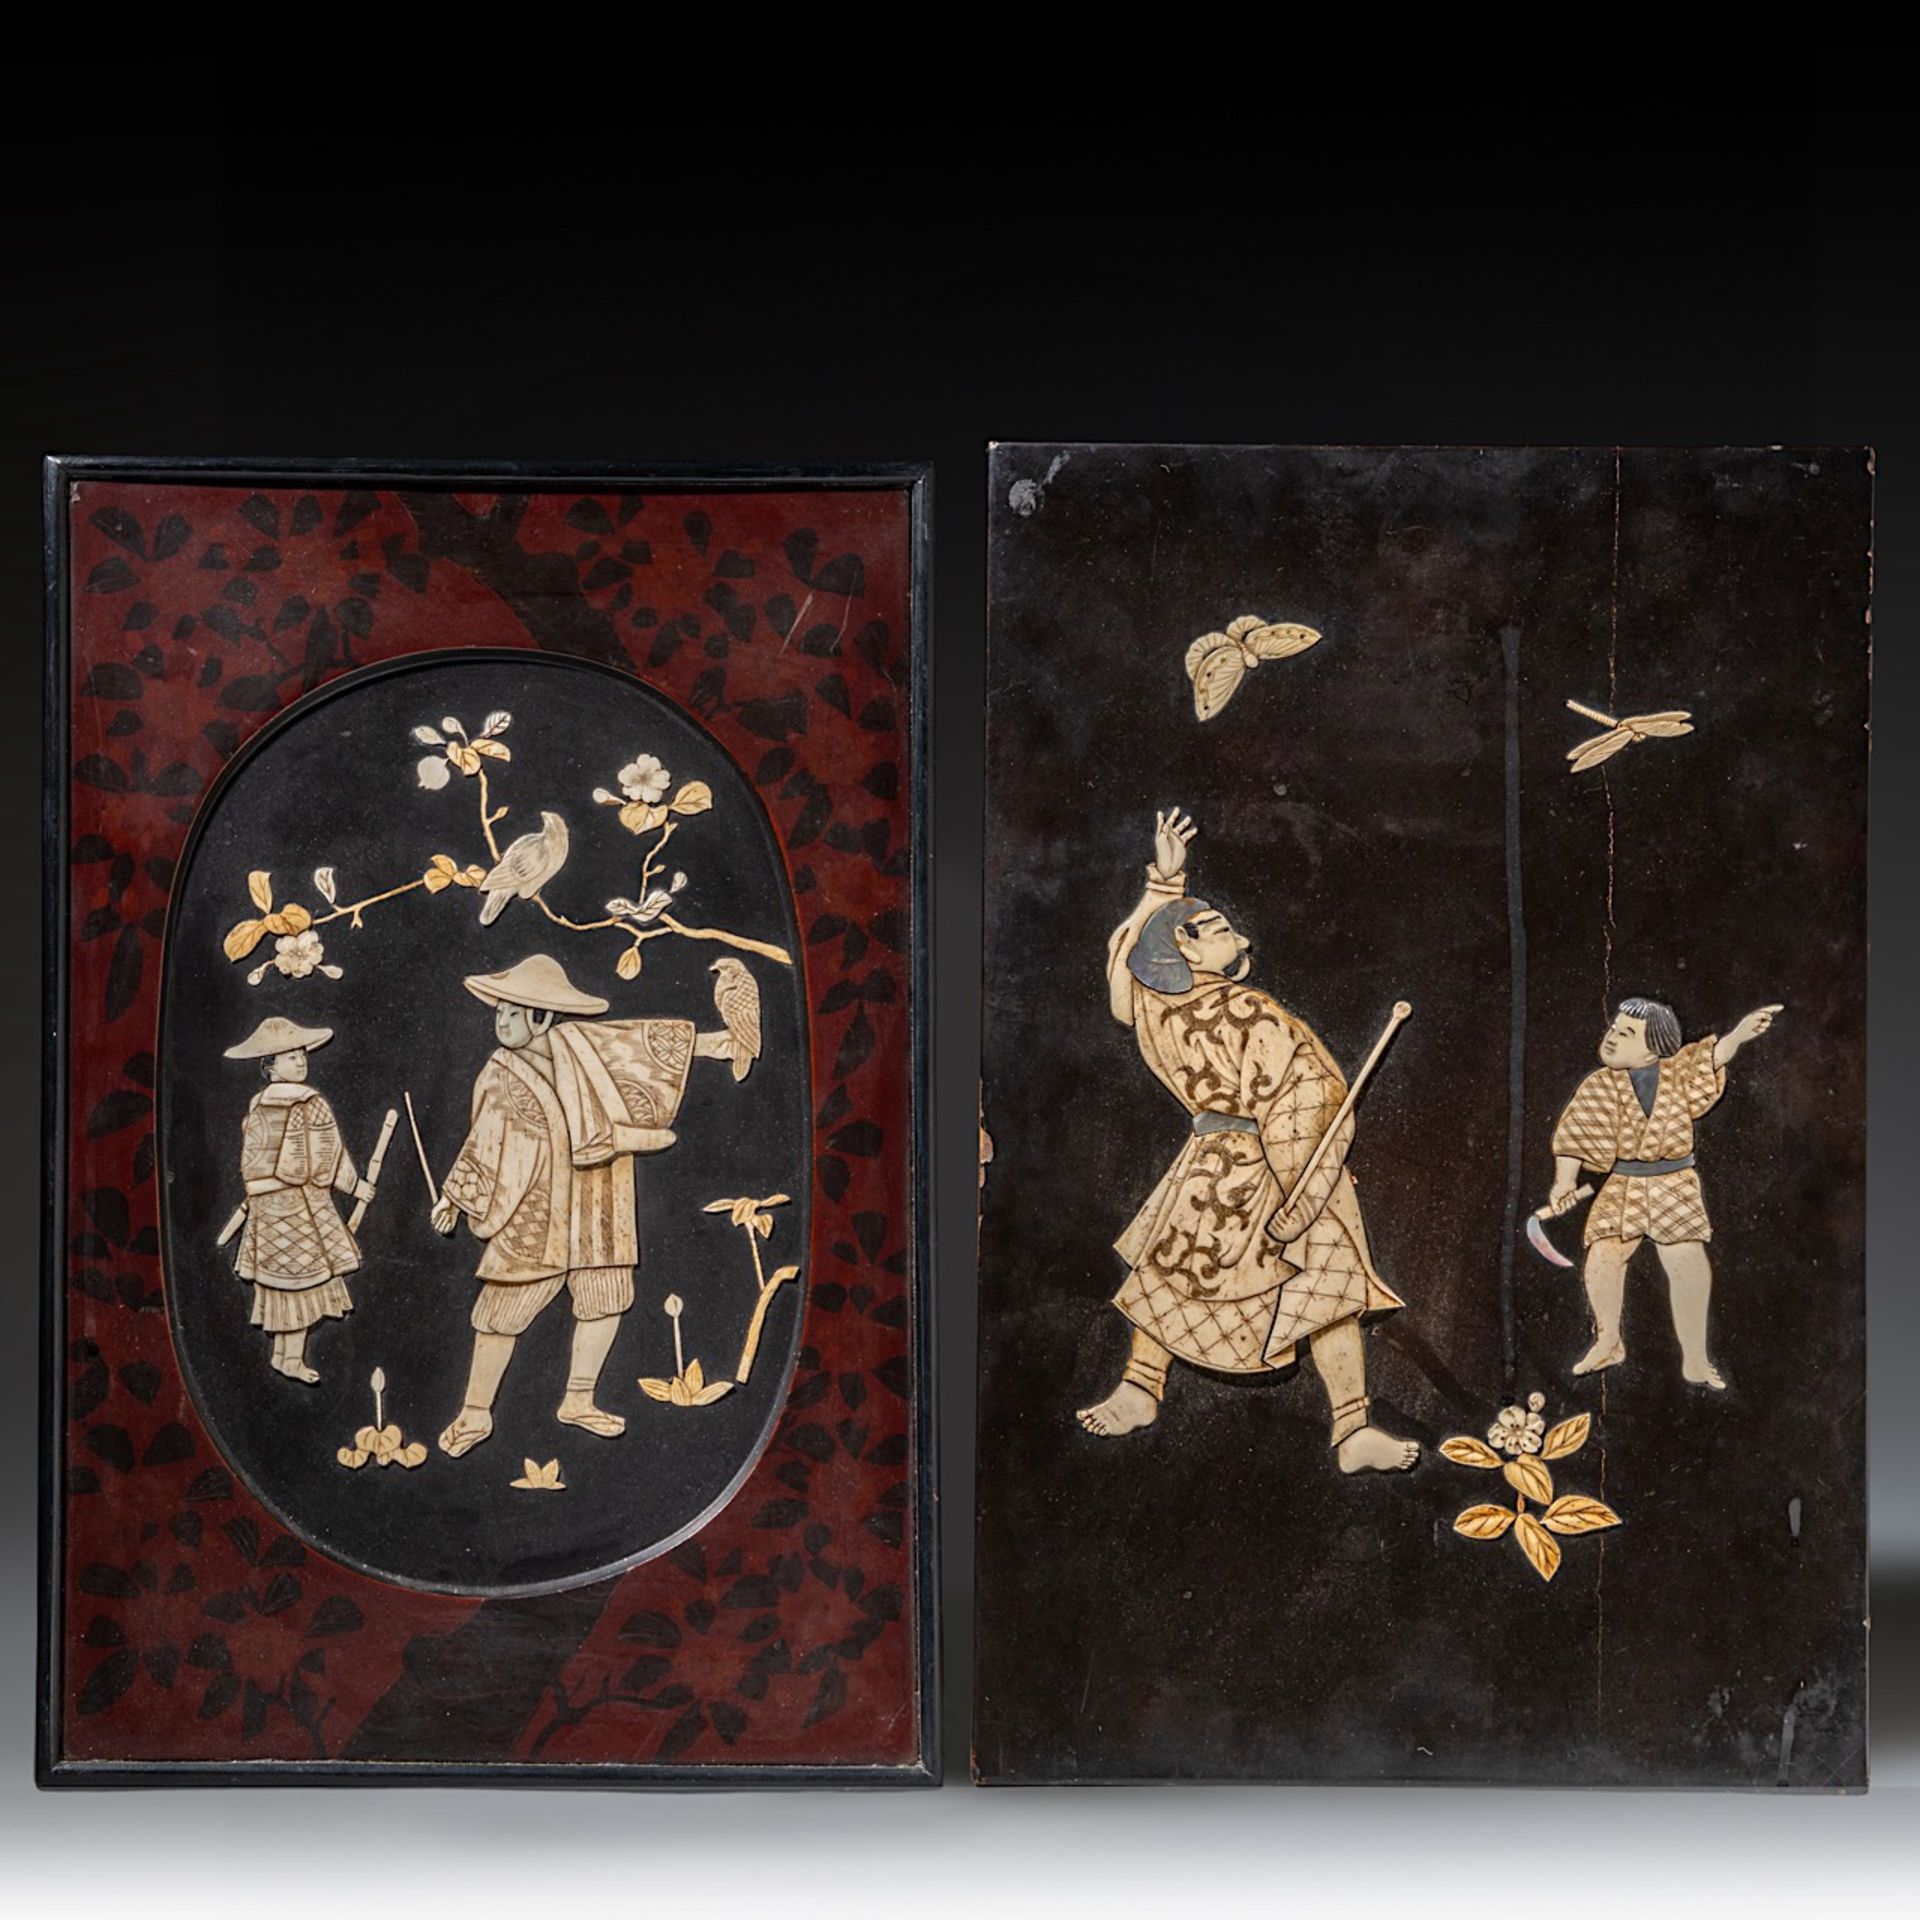 Two lacquer panels with Shibayama inlay, Meiji period (1868-1912), both 47x32 cm / 46x30 cm